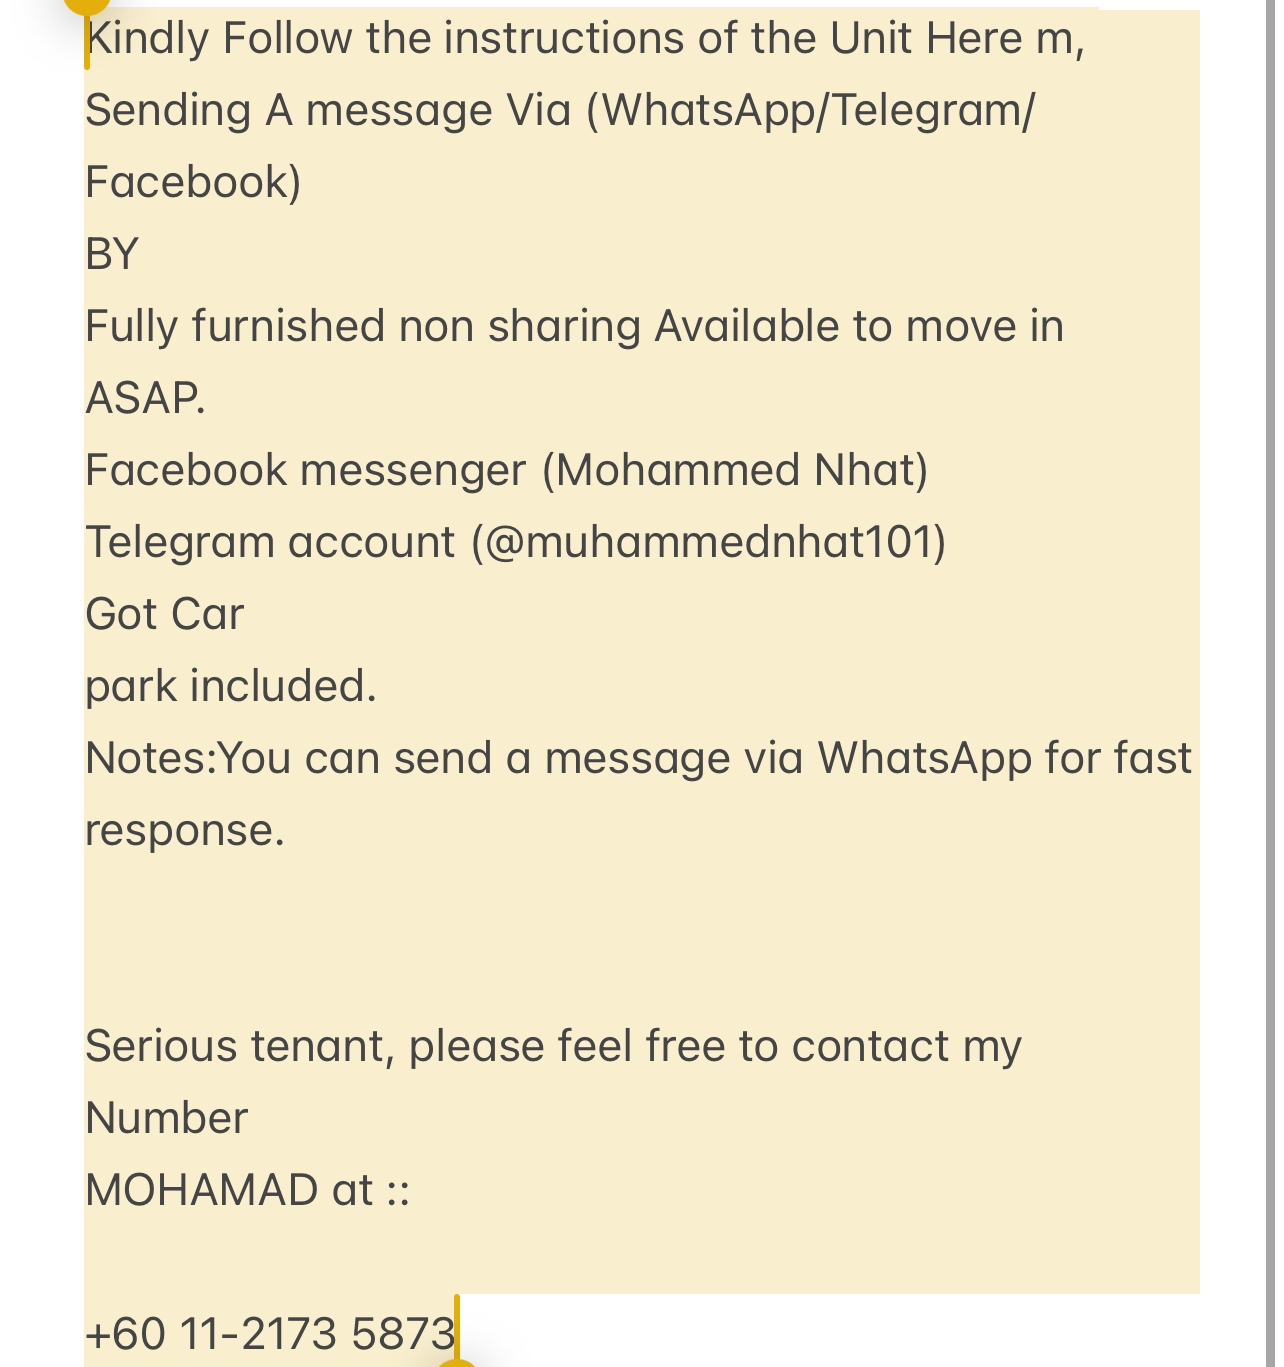 room for rent, master room, jalan perak, Send the owner a message on WhatsApp/facebook if you want to RENT the unit facebook (Mohammed Nhat)&Telegram(@muhammednhat101) Fully furnished non sharing :(comfortable)